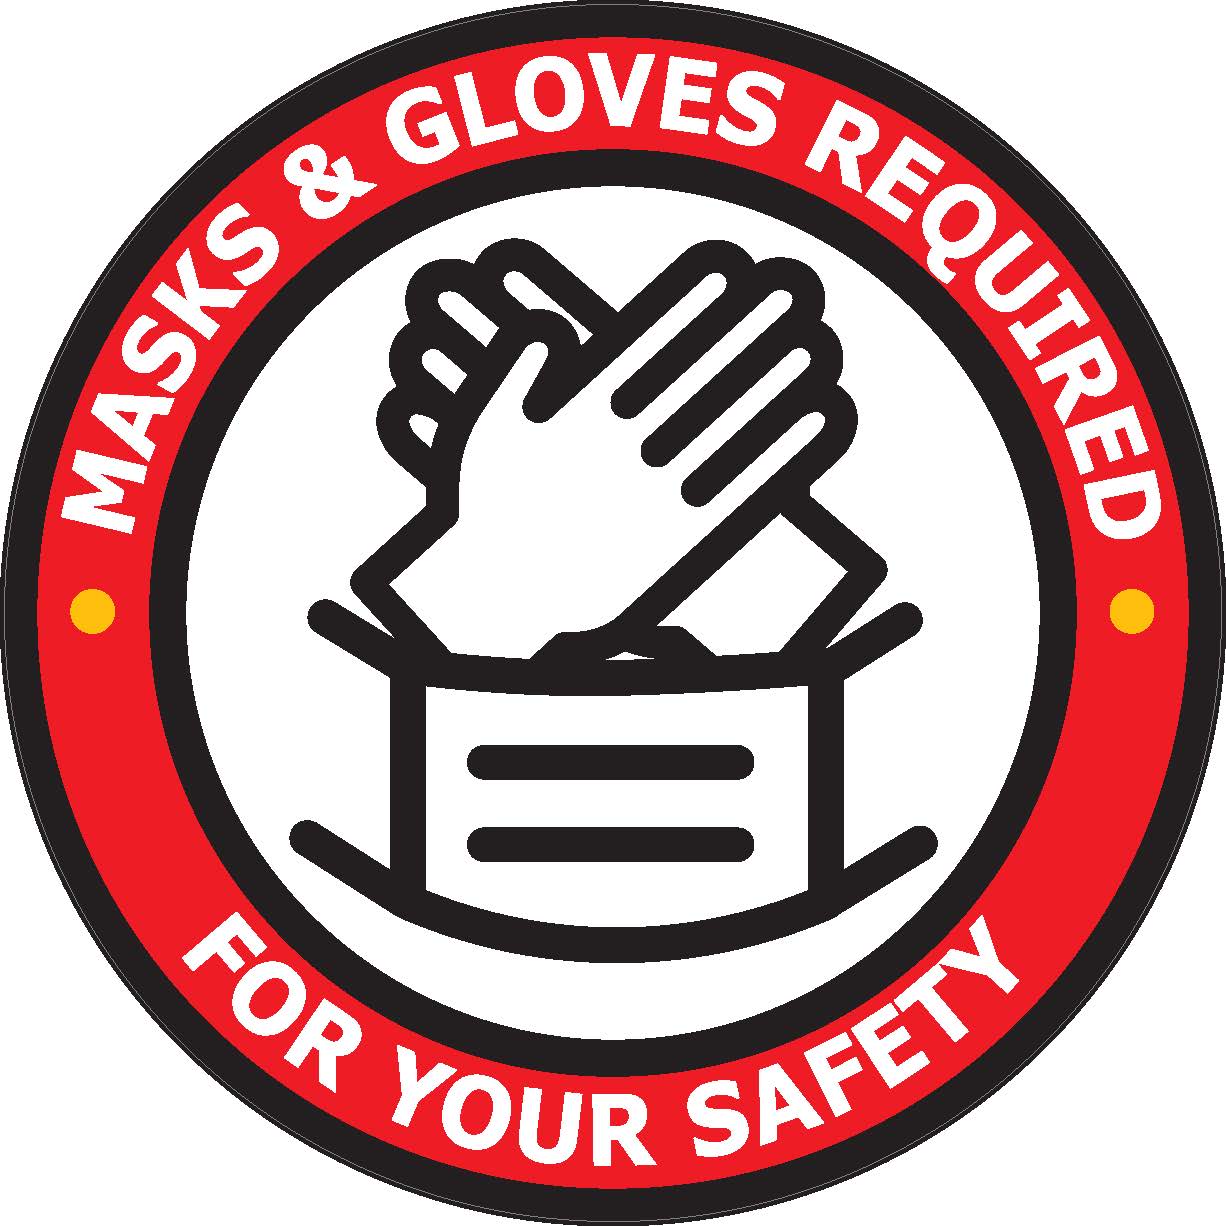 Mask & Gloves Required Sign 24x24"